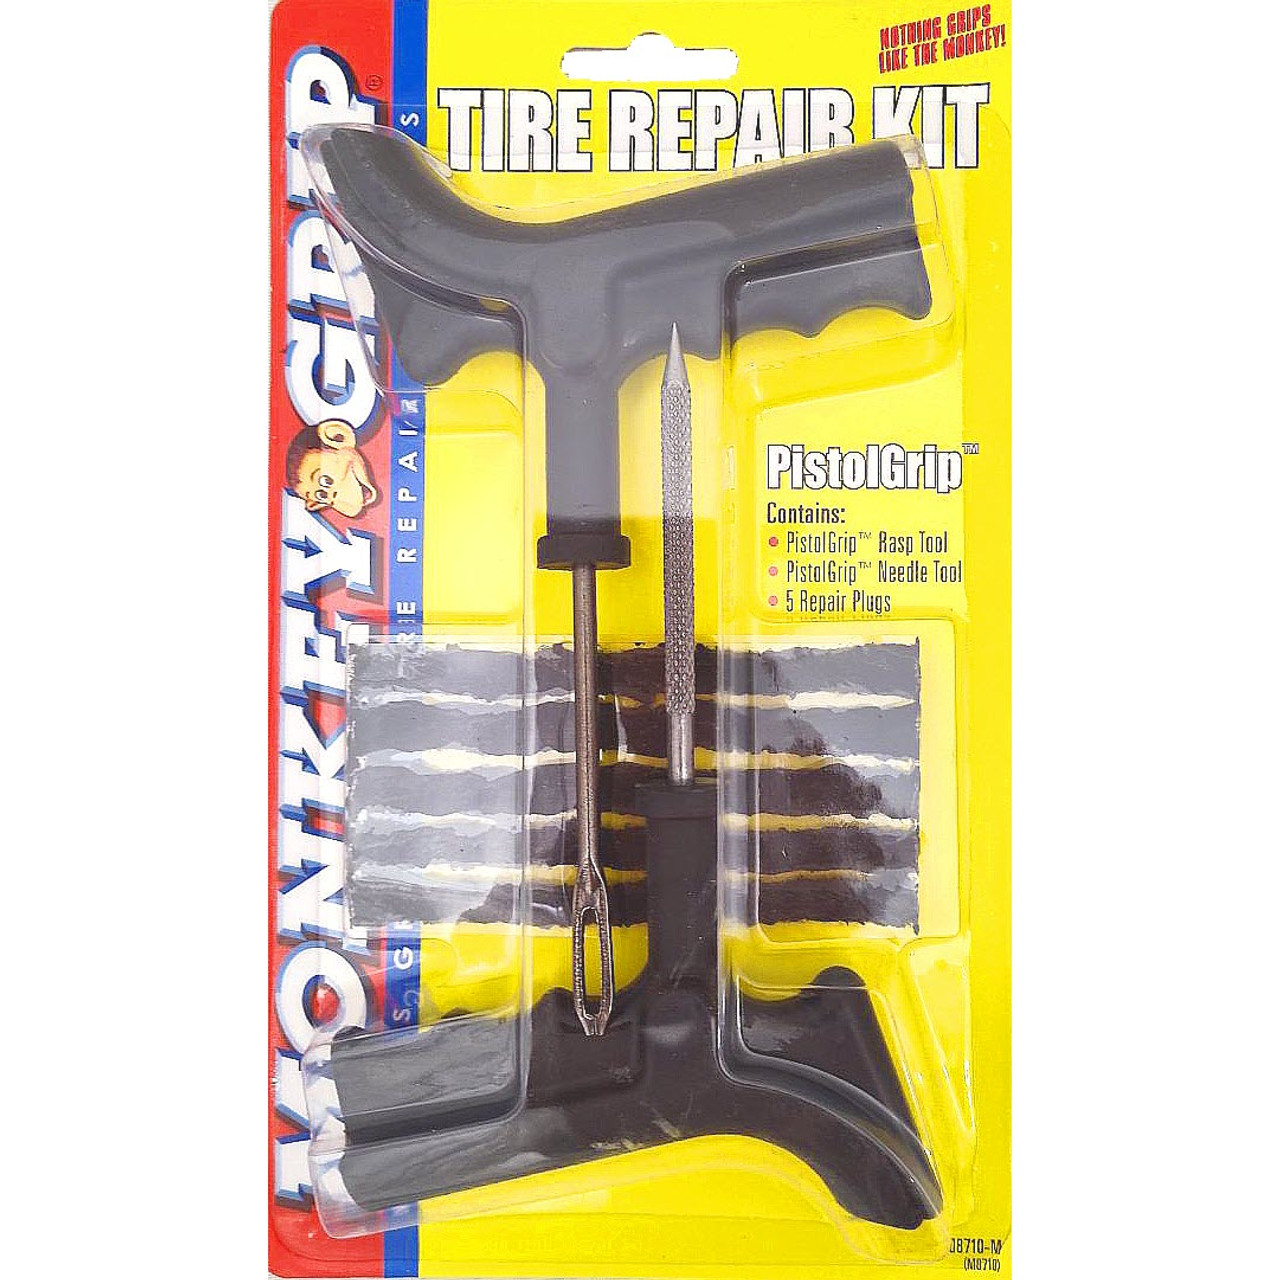 Victor Monkey Grip Tire & Rubber Patch Kit For All Rubber Repairs